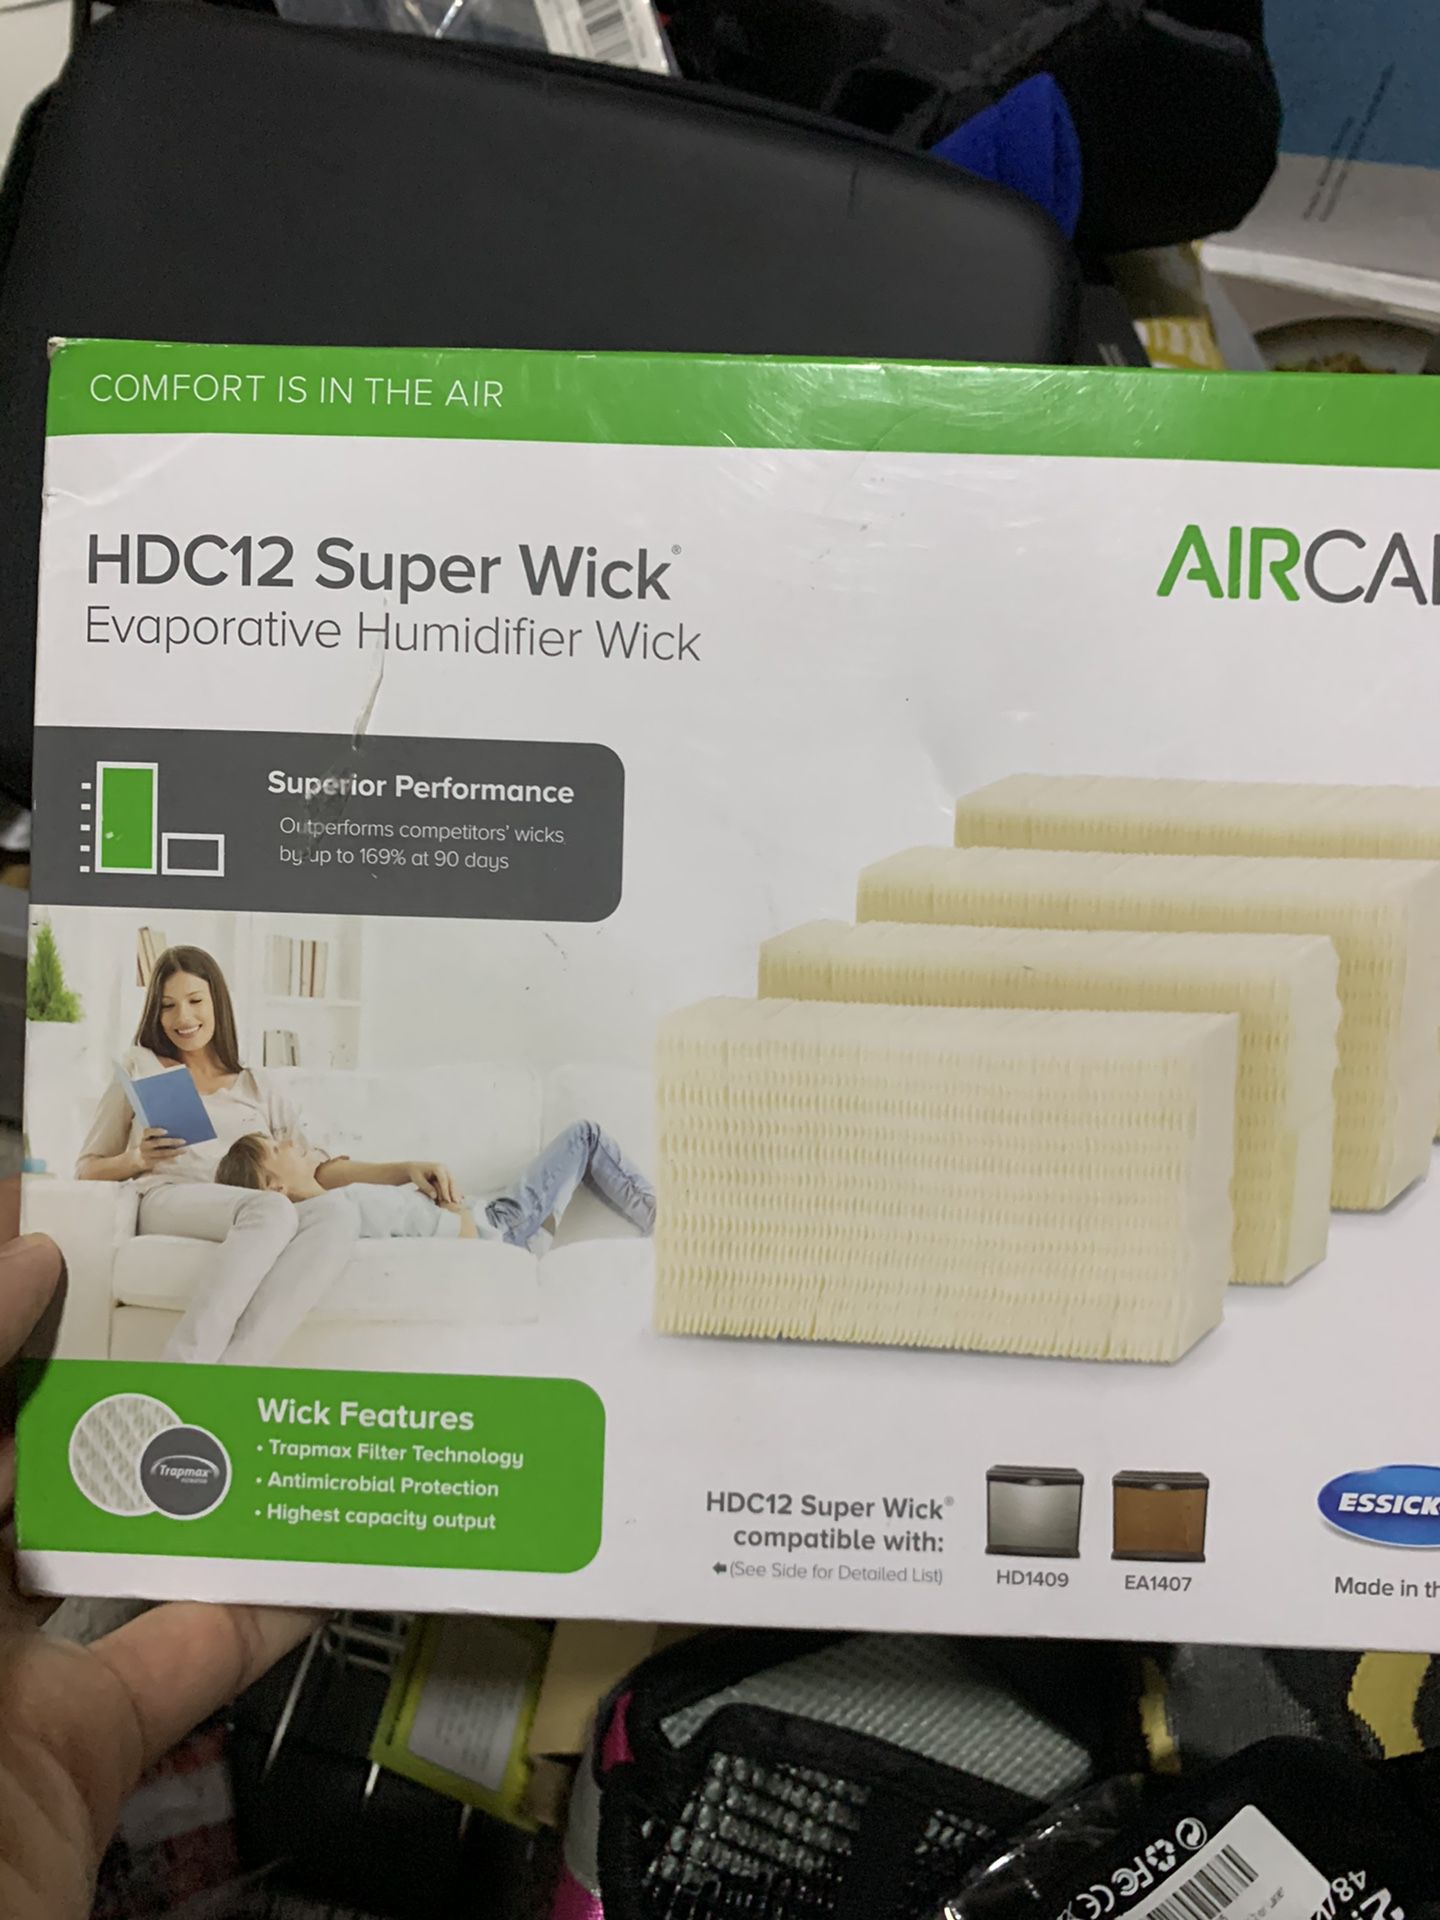 Humidifier filters